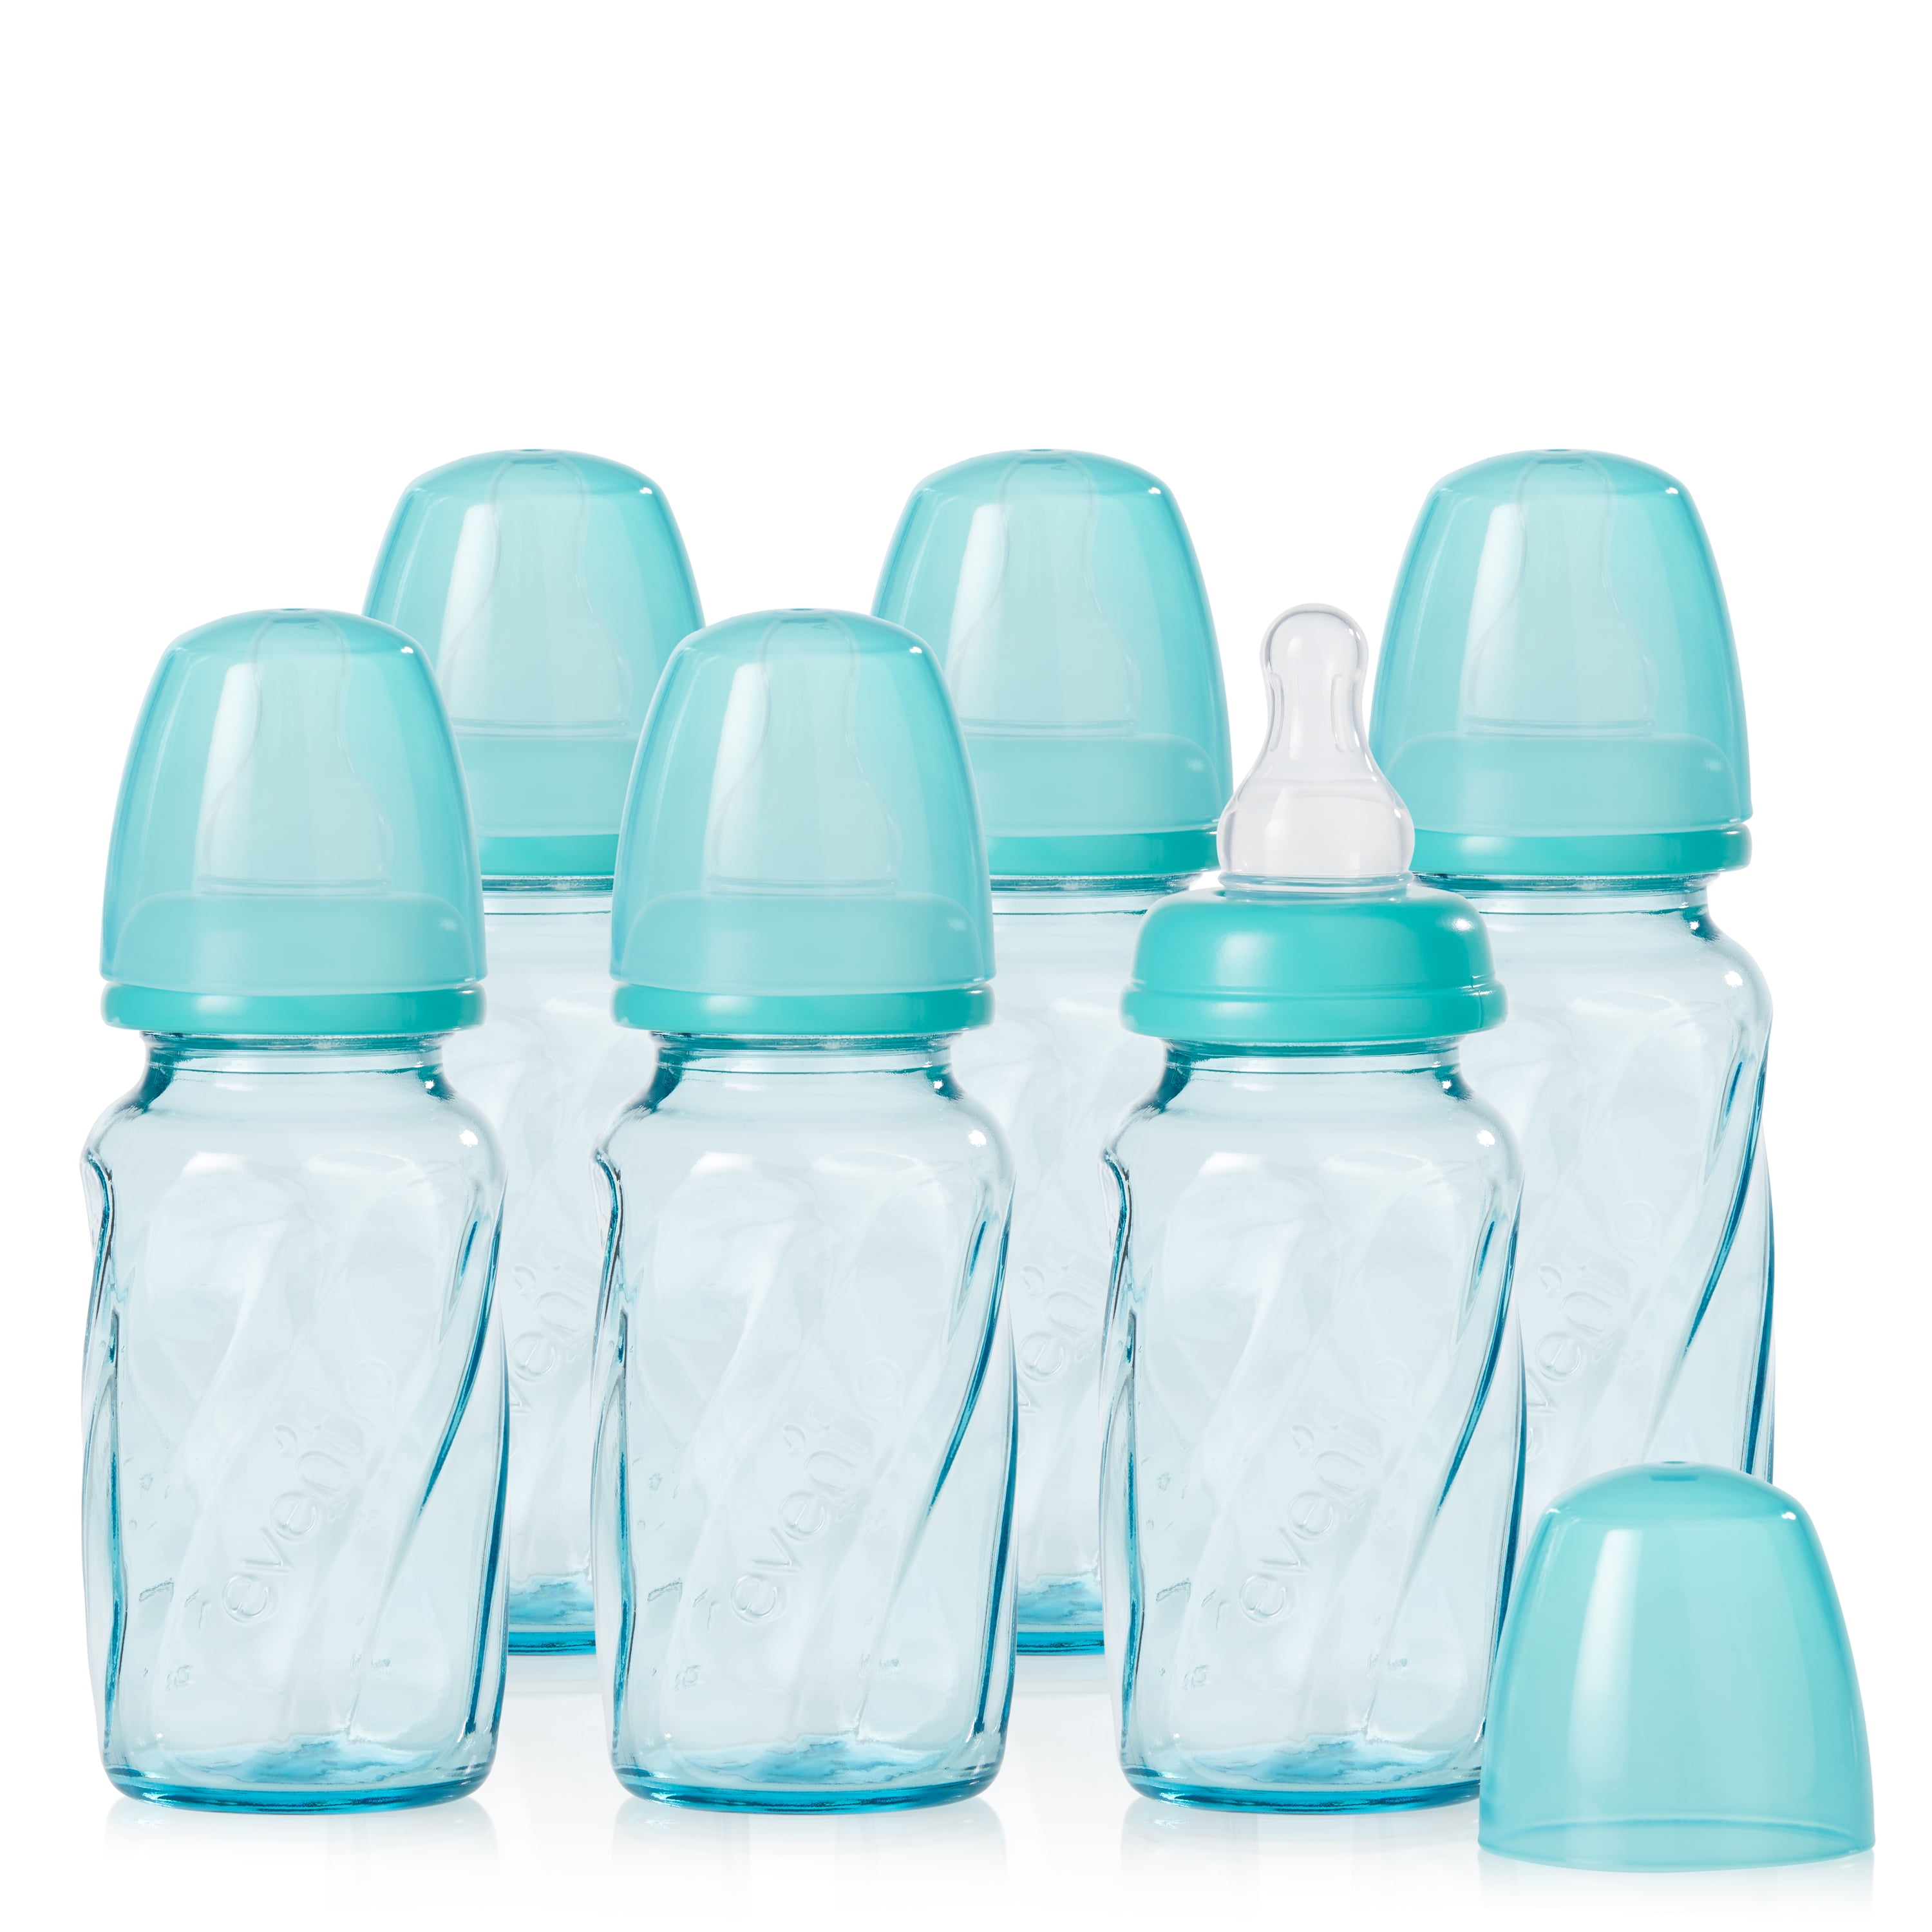 Glass Baby Bottles - 4oz, Teal, 6ct 